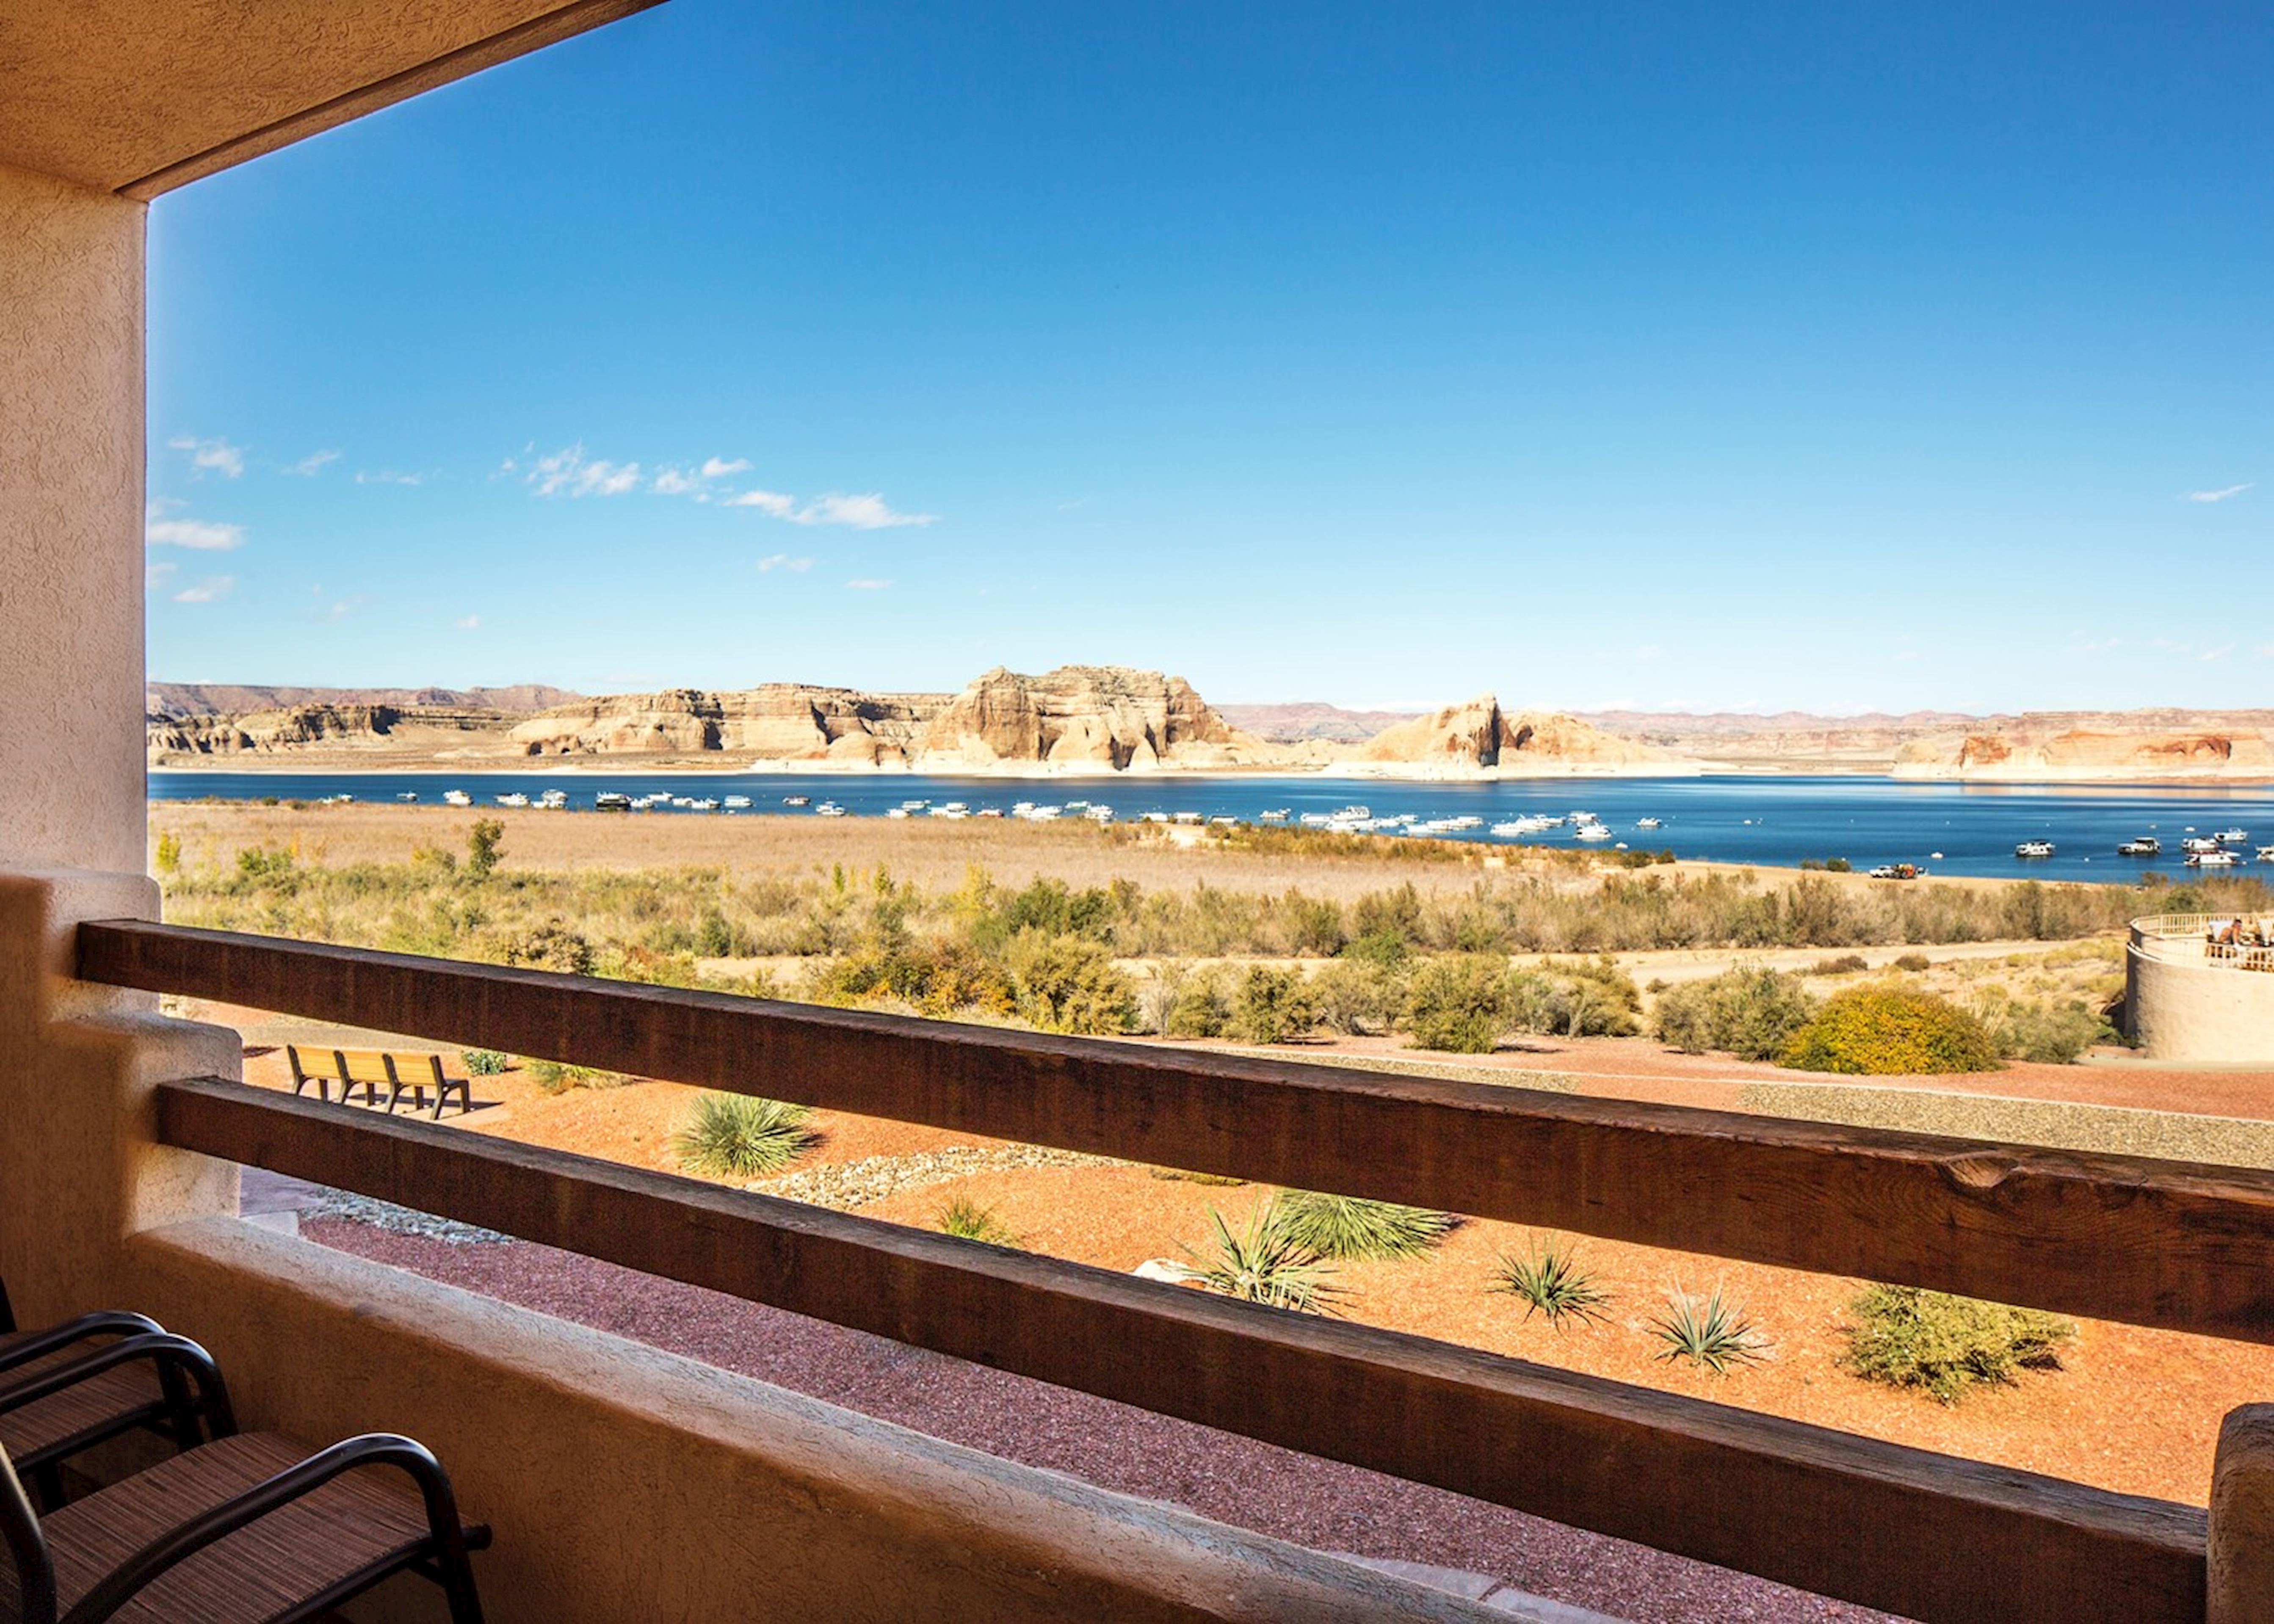 Lake Powell Resort Hotels In Page Audley Travel